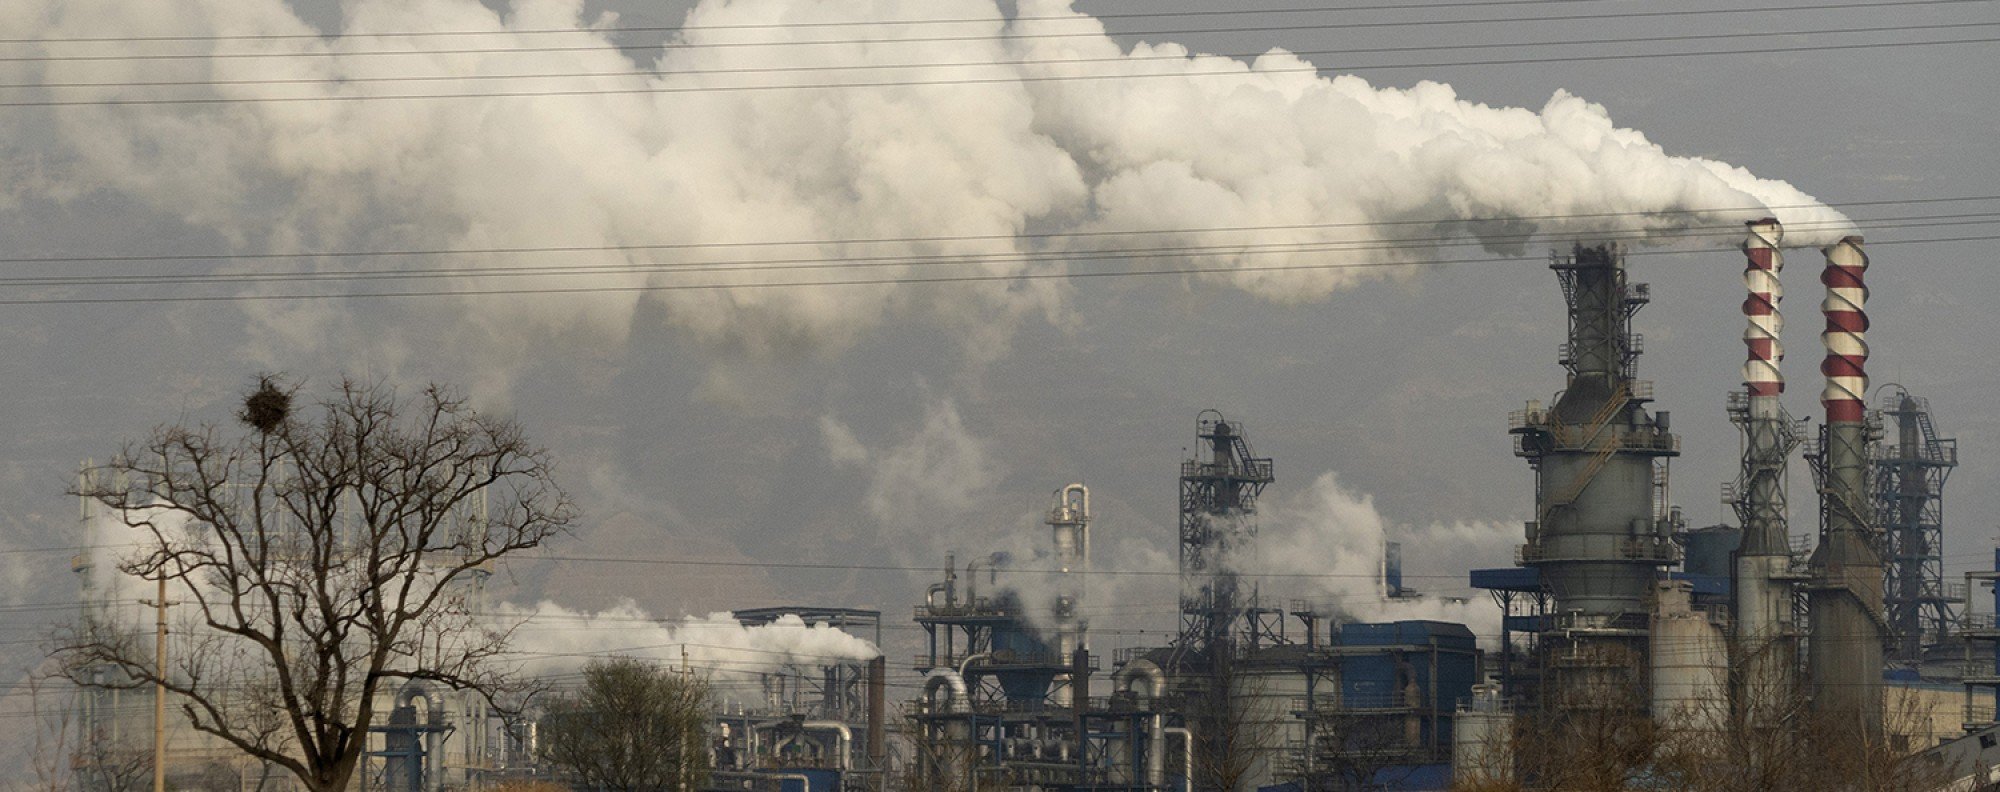 A coal processing plant in Hejin in central China's Shanxi Province. Photo: AP